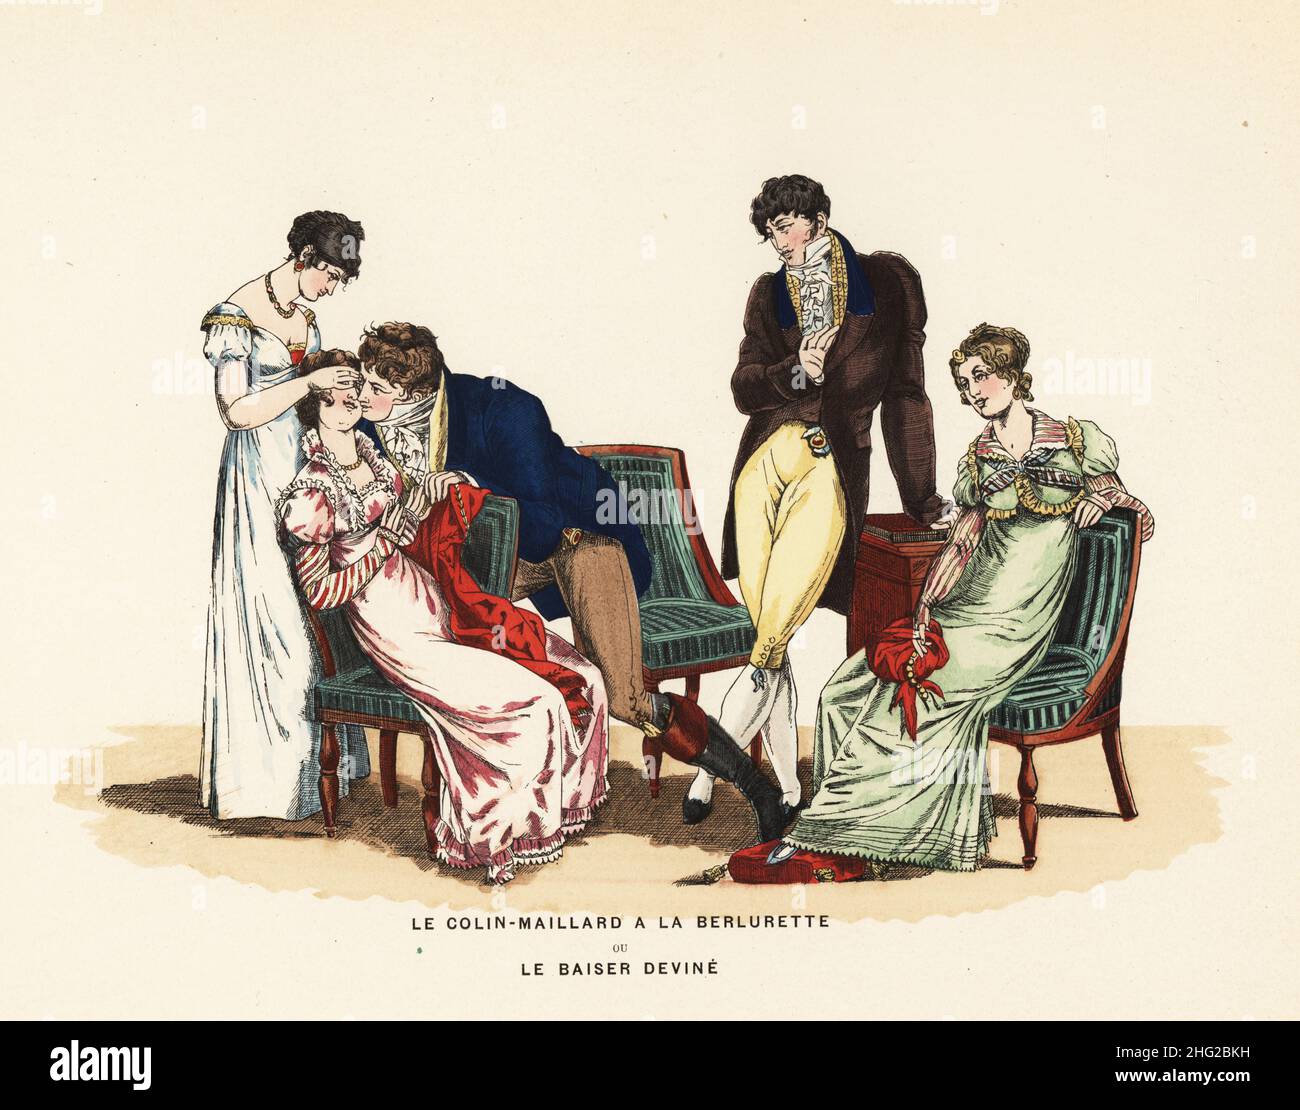 Fashionable people at a party play the game of Guess the Kisser, a parlour game where a blindfolded girl has to guess who is kissing her on the cheek. Le Colin-Maillard a la Berlurette, Le Baiser Devine. After Dutailly from Pierre de la Mesangere's Le Bon Genre, 1817. Handcoloured lithograph from Henry Rene d’Allemagne’s Recreations et Passe-Temps, Games and Pastimes, Hachette, Paris, 1906. Stock Photo